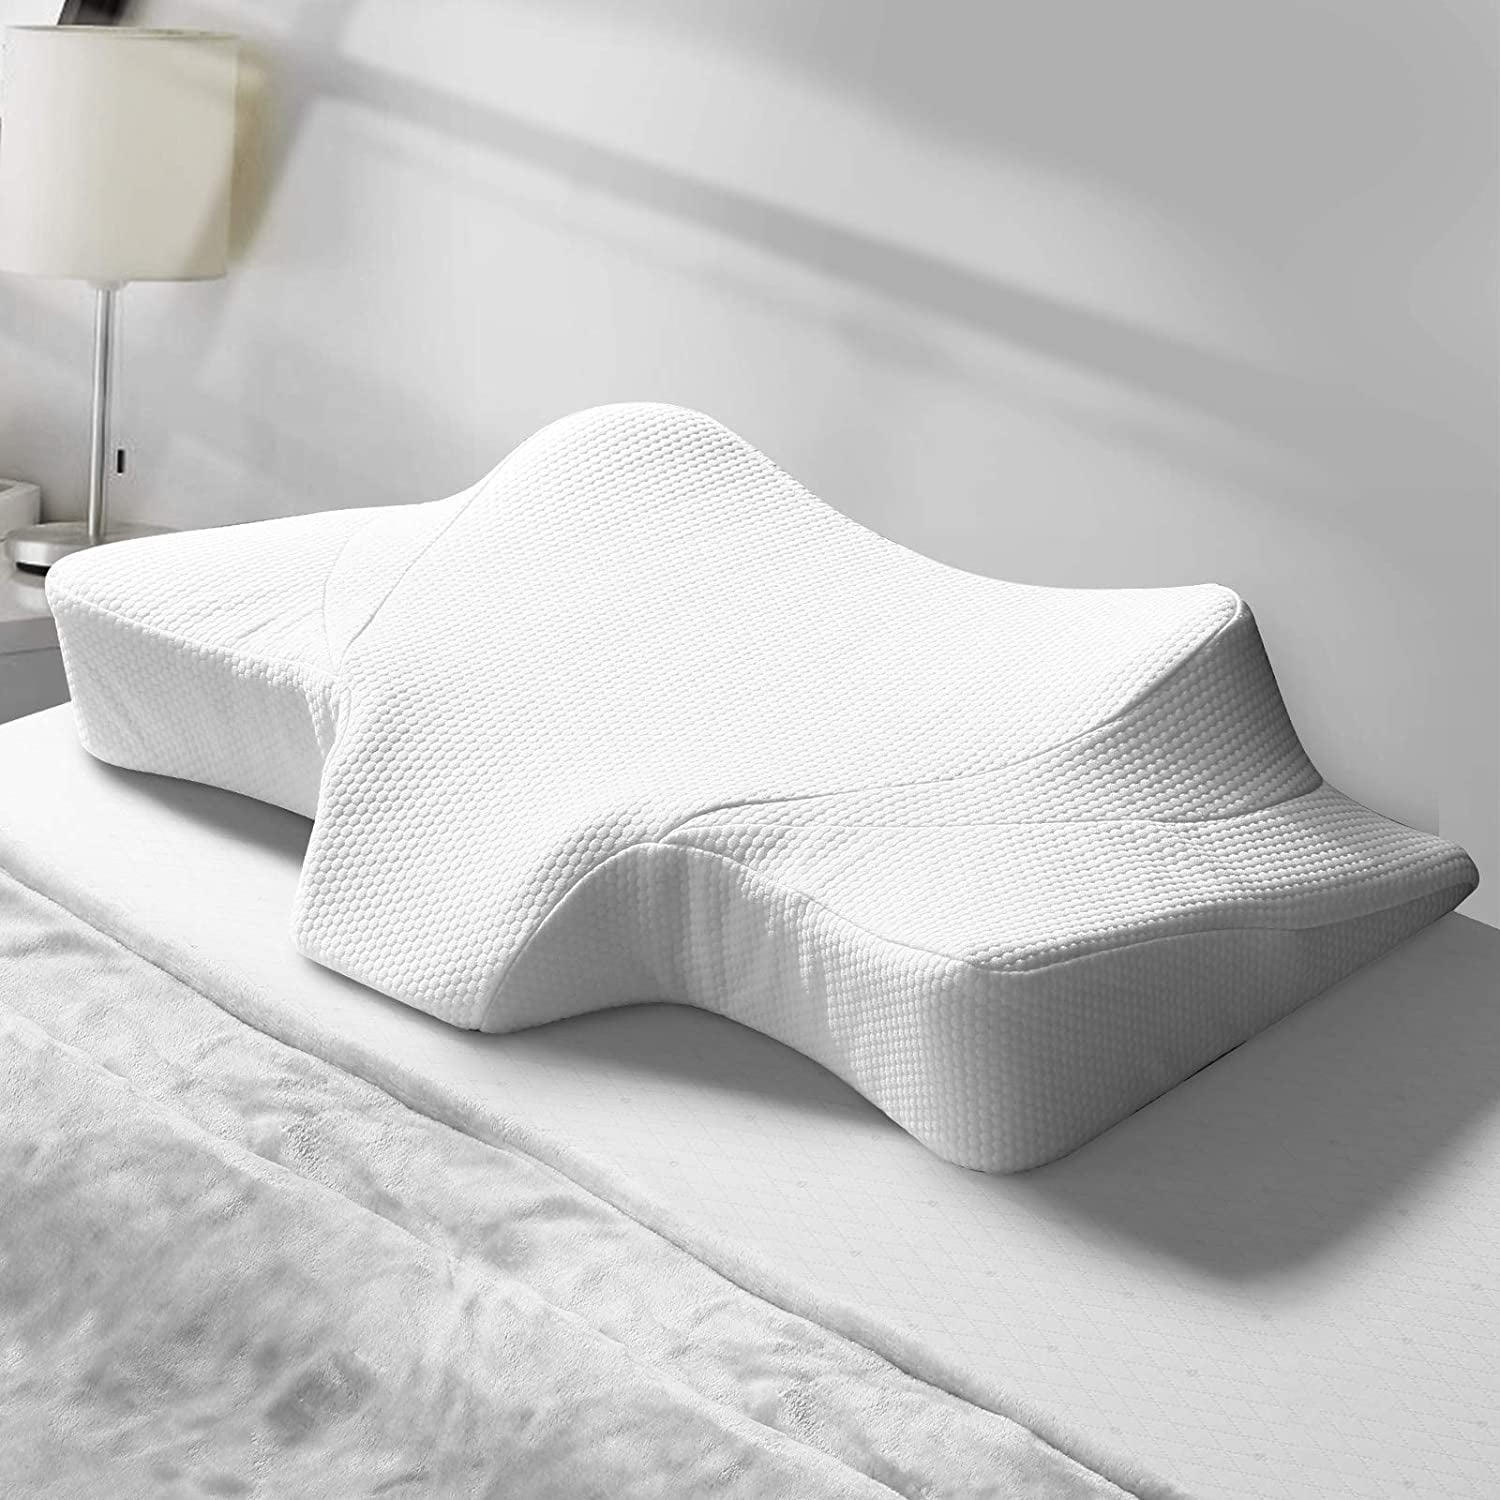 FREE COVER CONTOUR MEMORY FOAM PILLOW ORTHOPAEDIC FIRM PILLOWS 